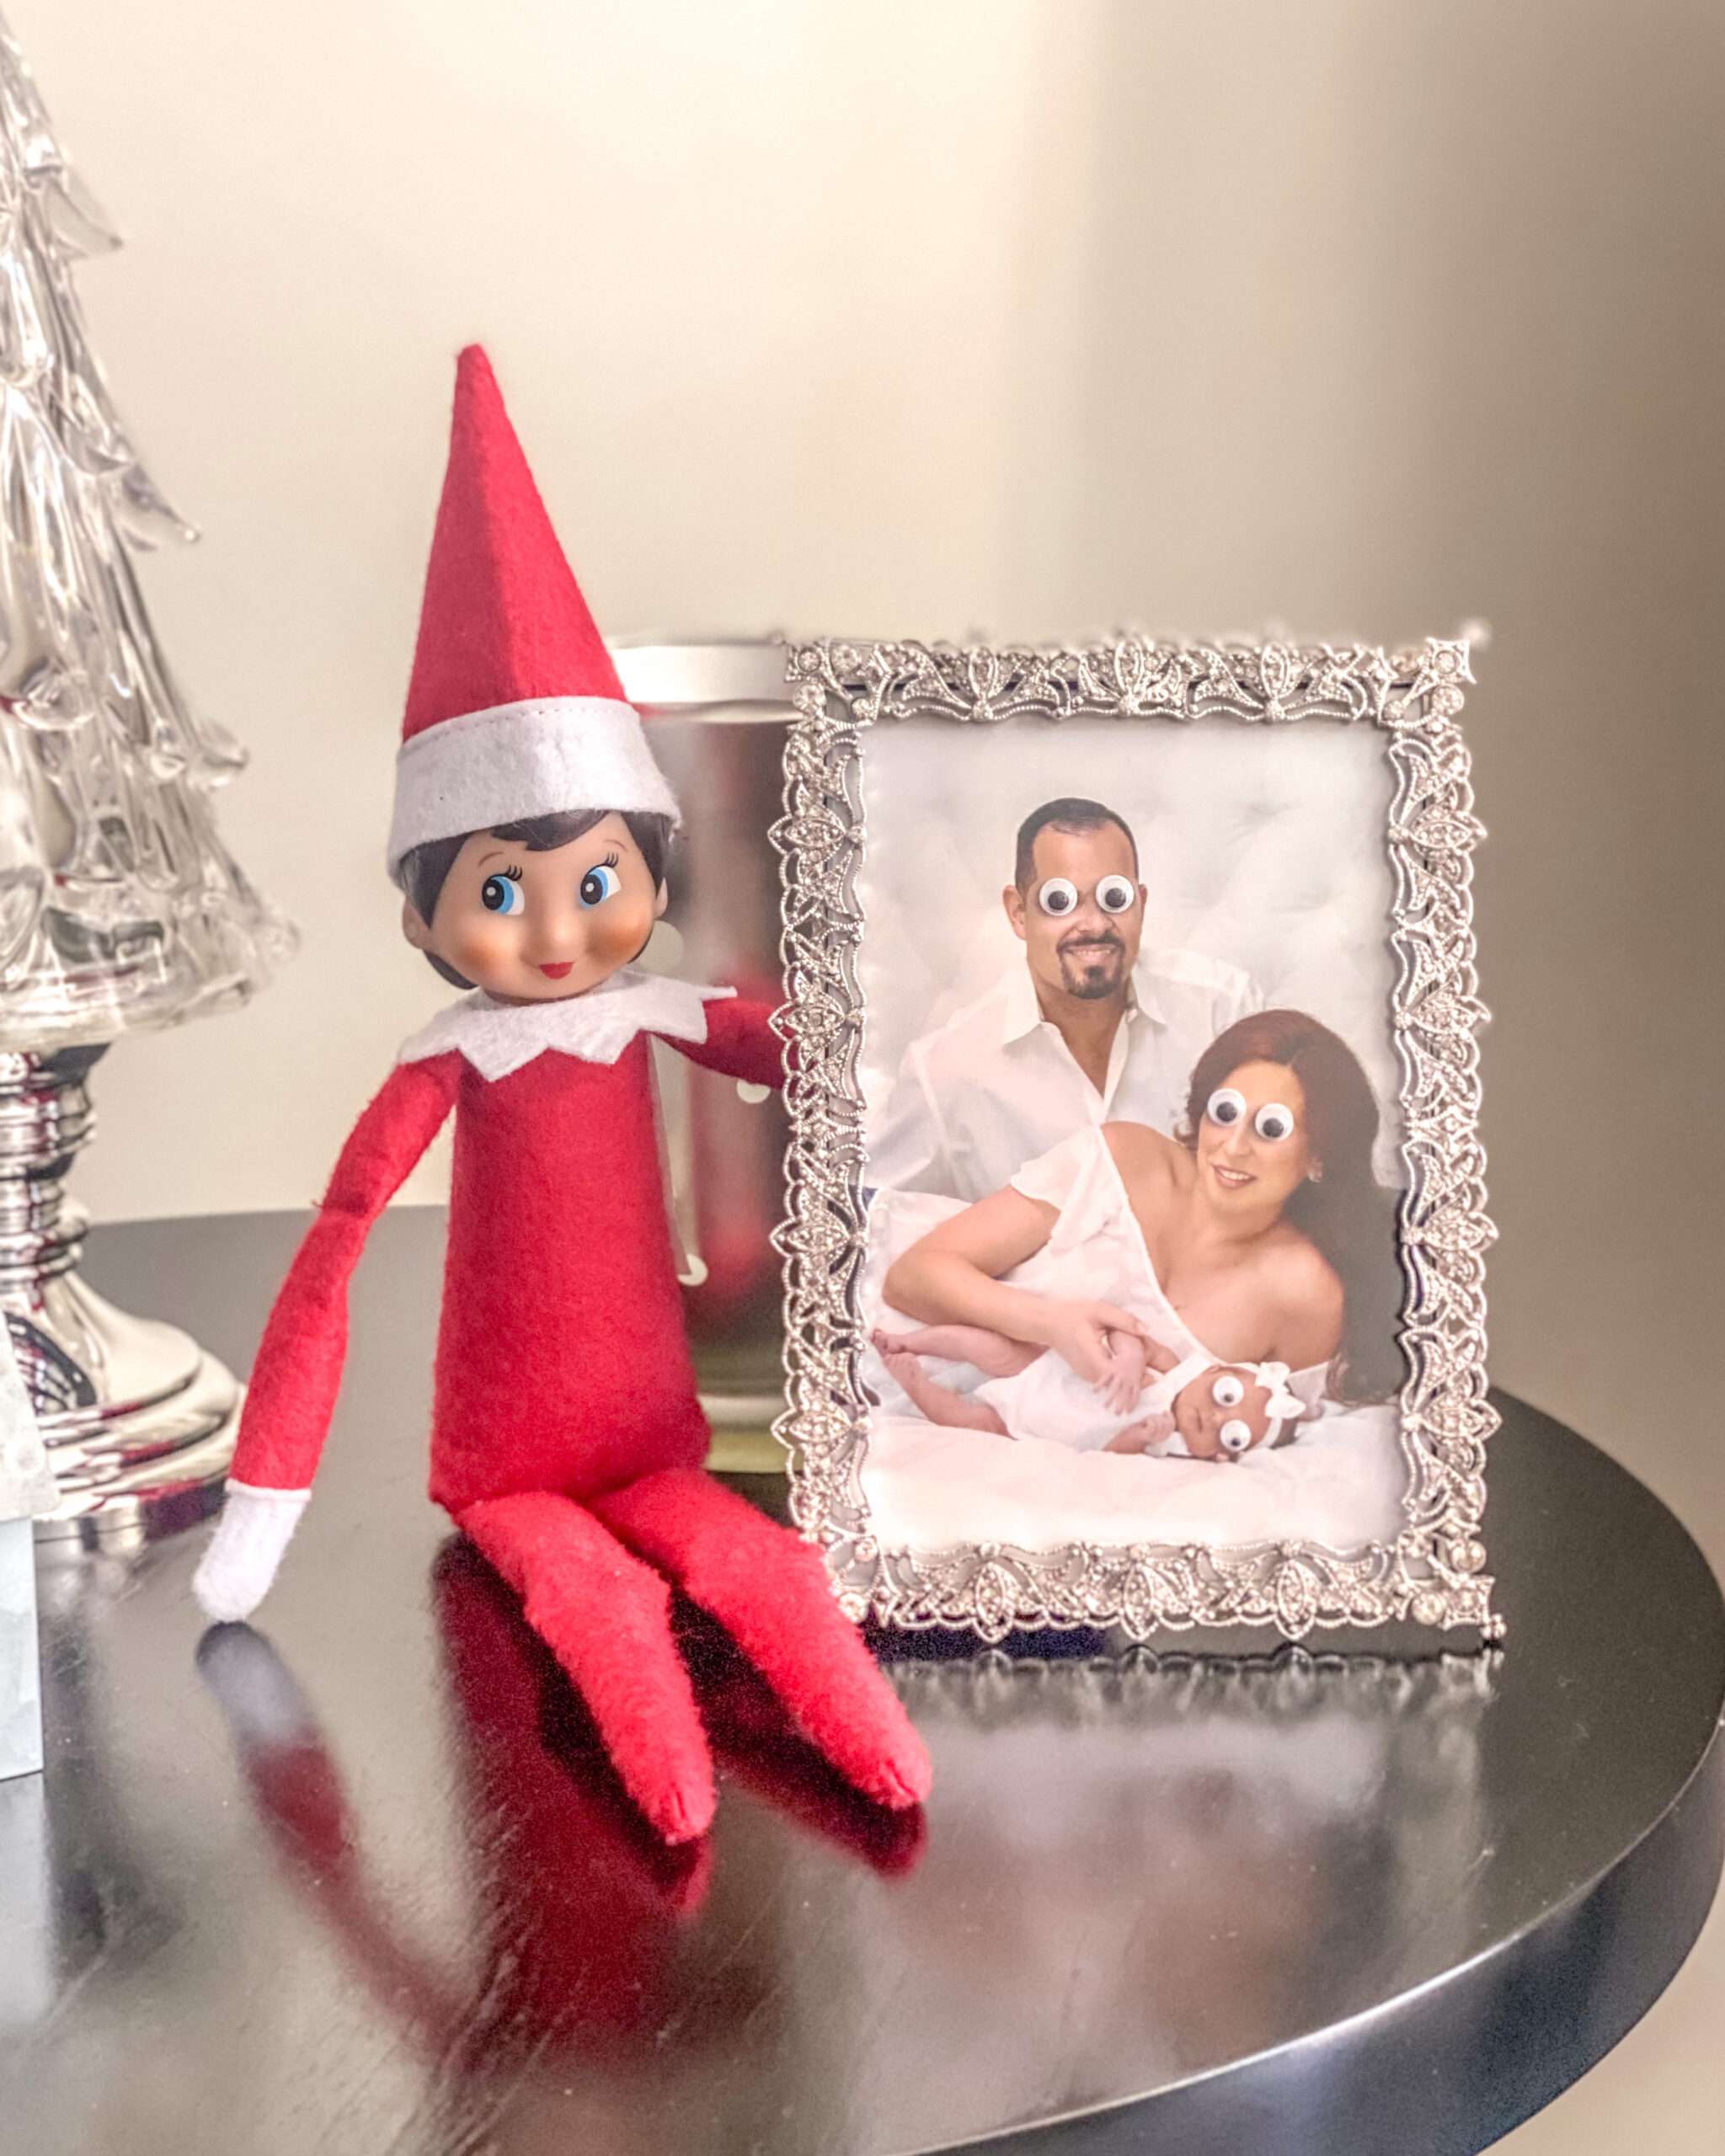 Googly eyes on family photos. Fun & easy Elf on the Shelf ideas for your toddler or little kid. Quick to setup and lots of naughty and nice ideas, perfect to bring some Christmas magic to your home. #ElfOnTheShelf #ElfIdeas #ElfOnTheShelfIdeas #Christmas #ChristmasMagic